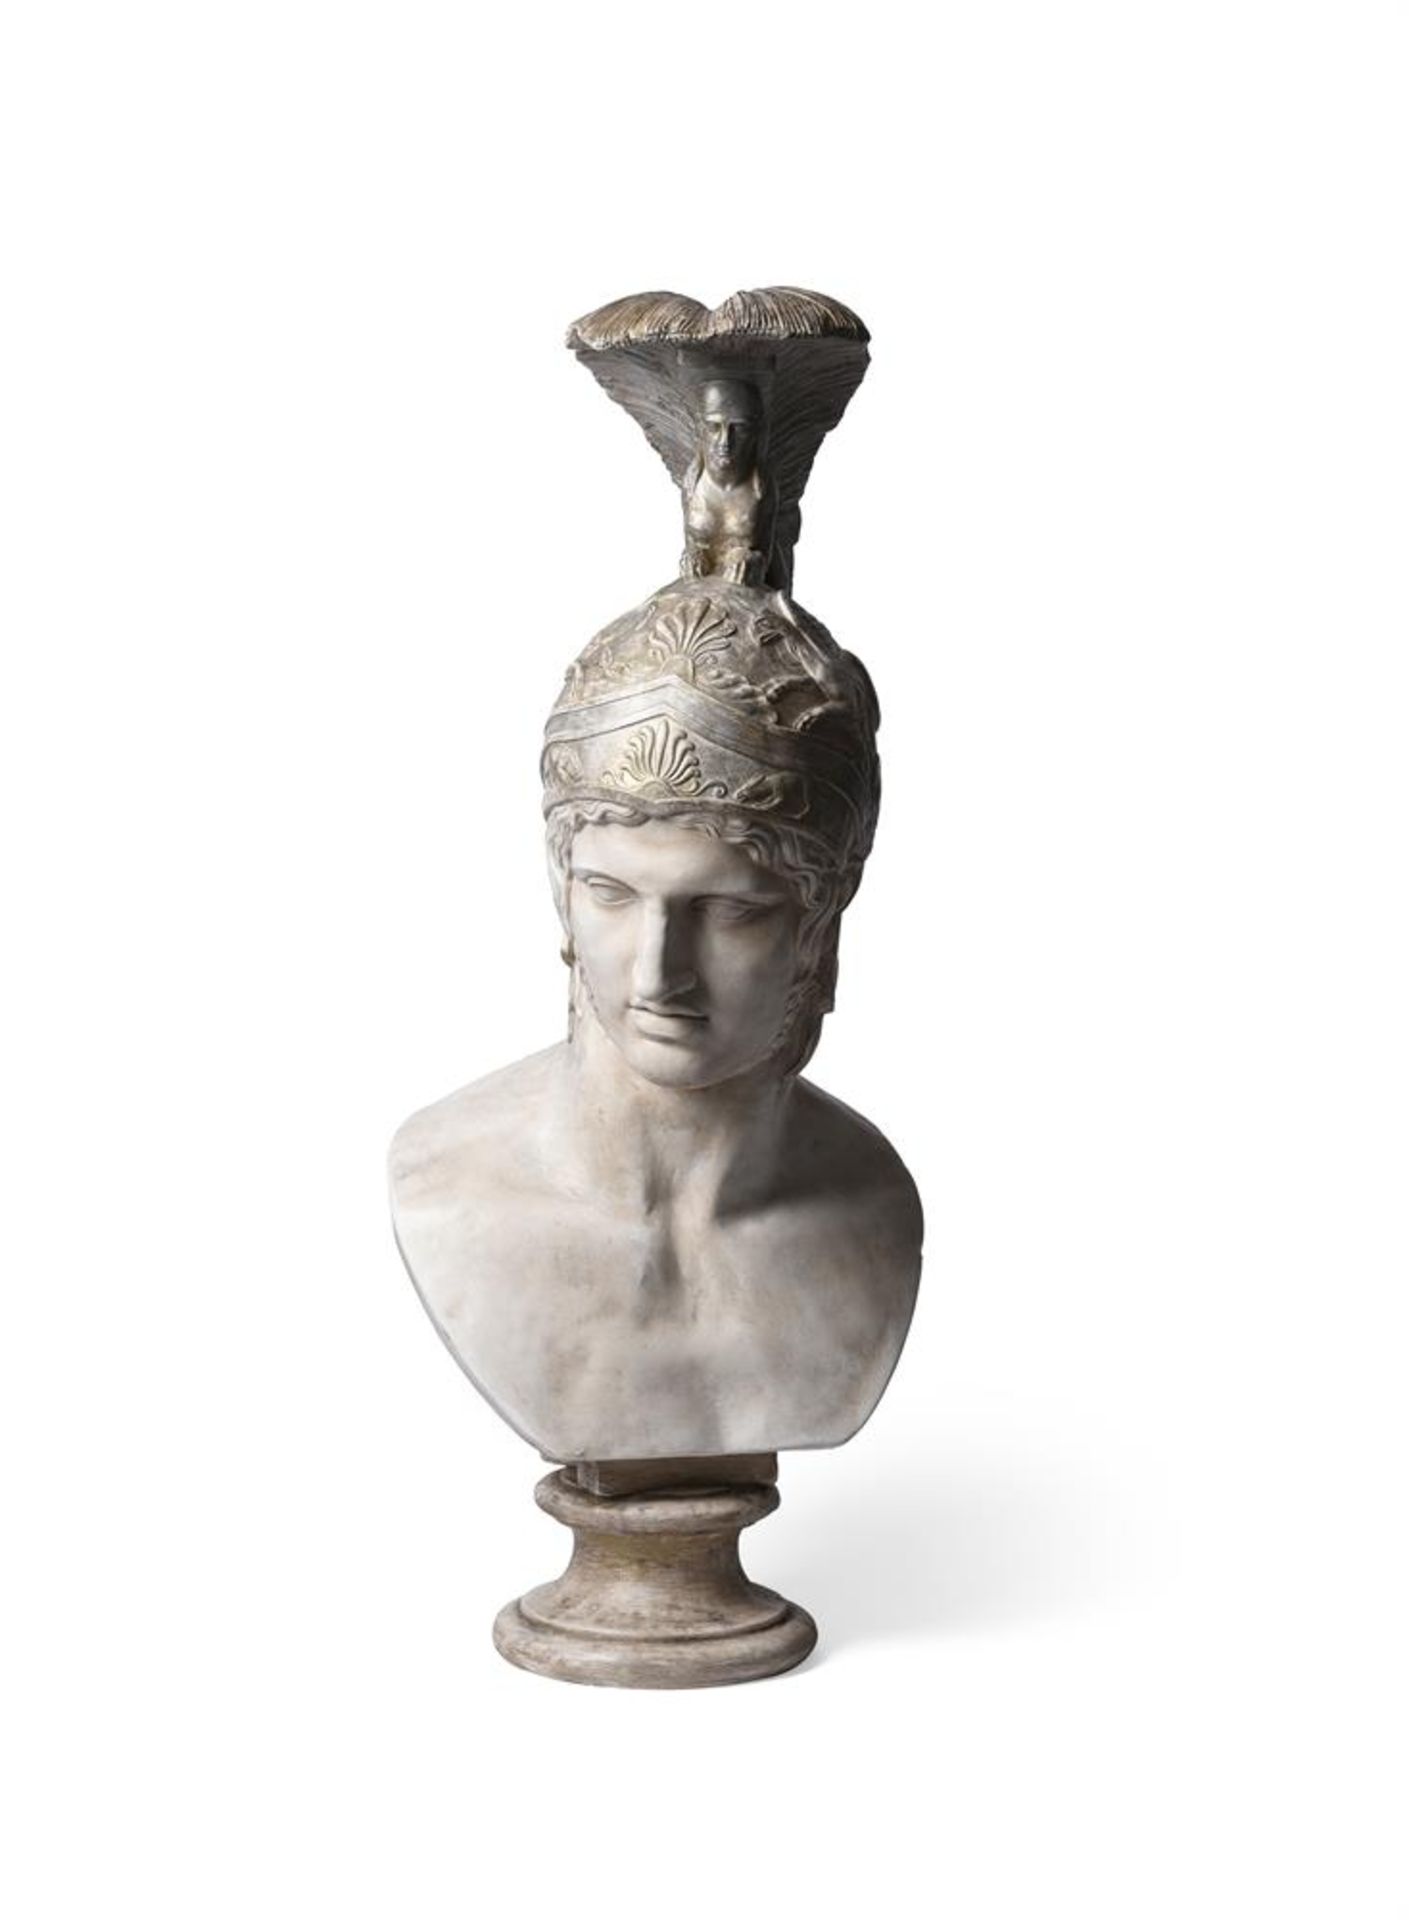 A LARGE PLASTER BUST OF ARES, THE GOD OF WAR, 20TH CENTURY, IN THE MANNER OF BRUCCIANI - Image 5 of 5